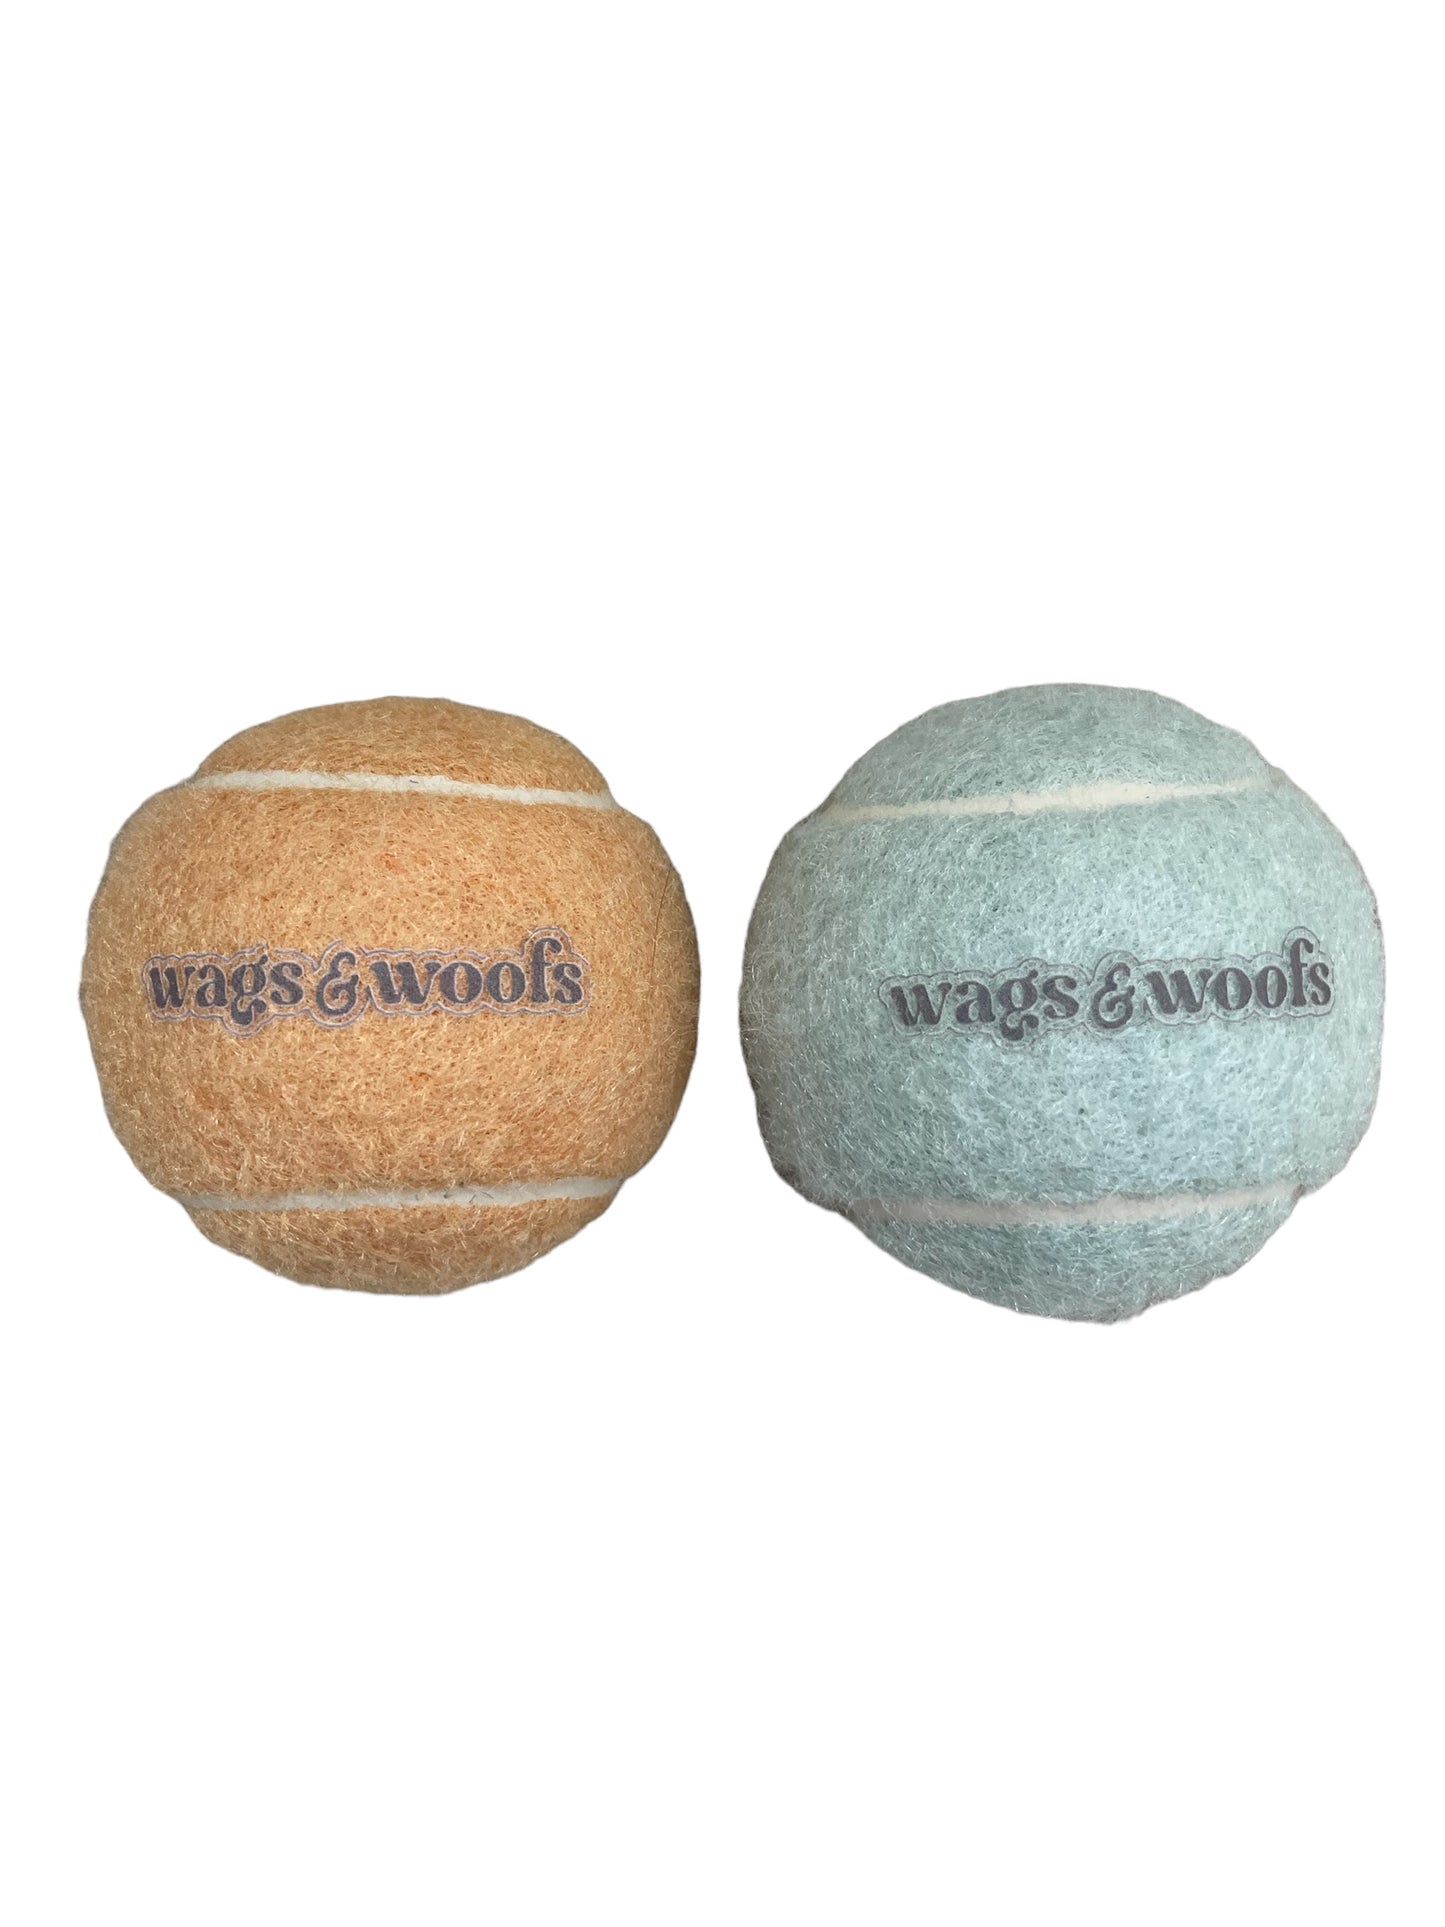 Wags and Woofs Tennis Balls